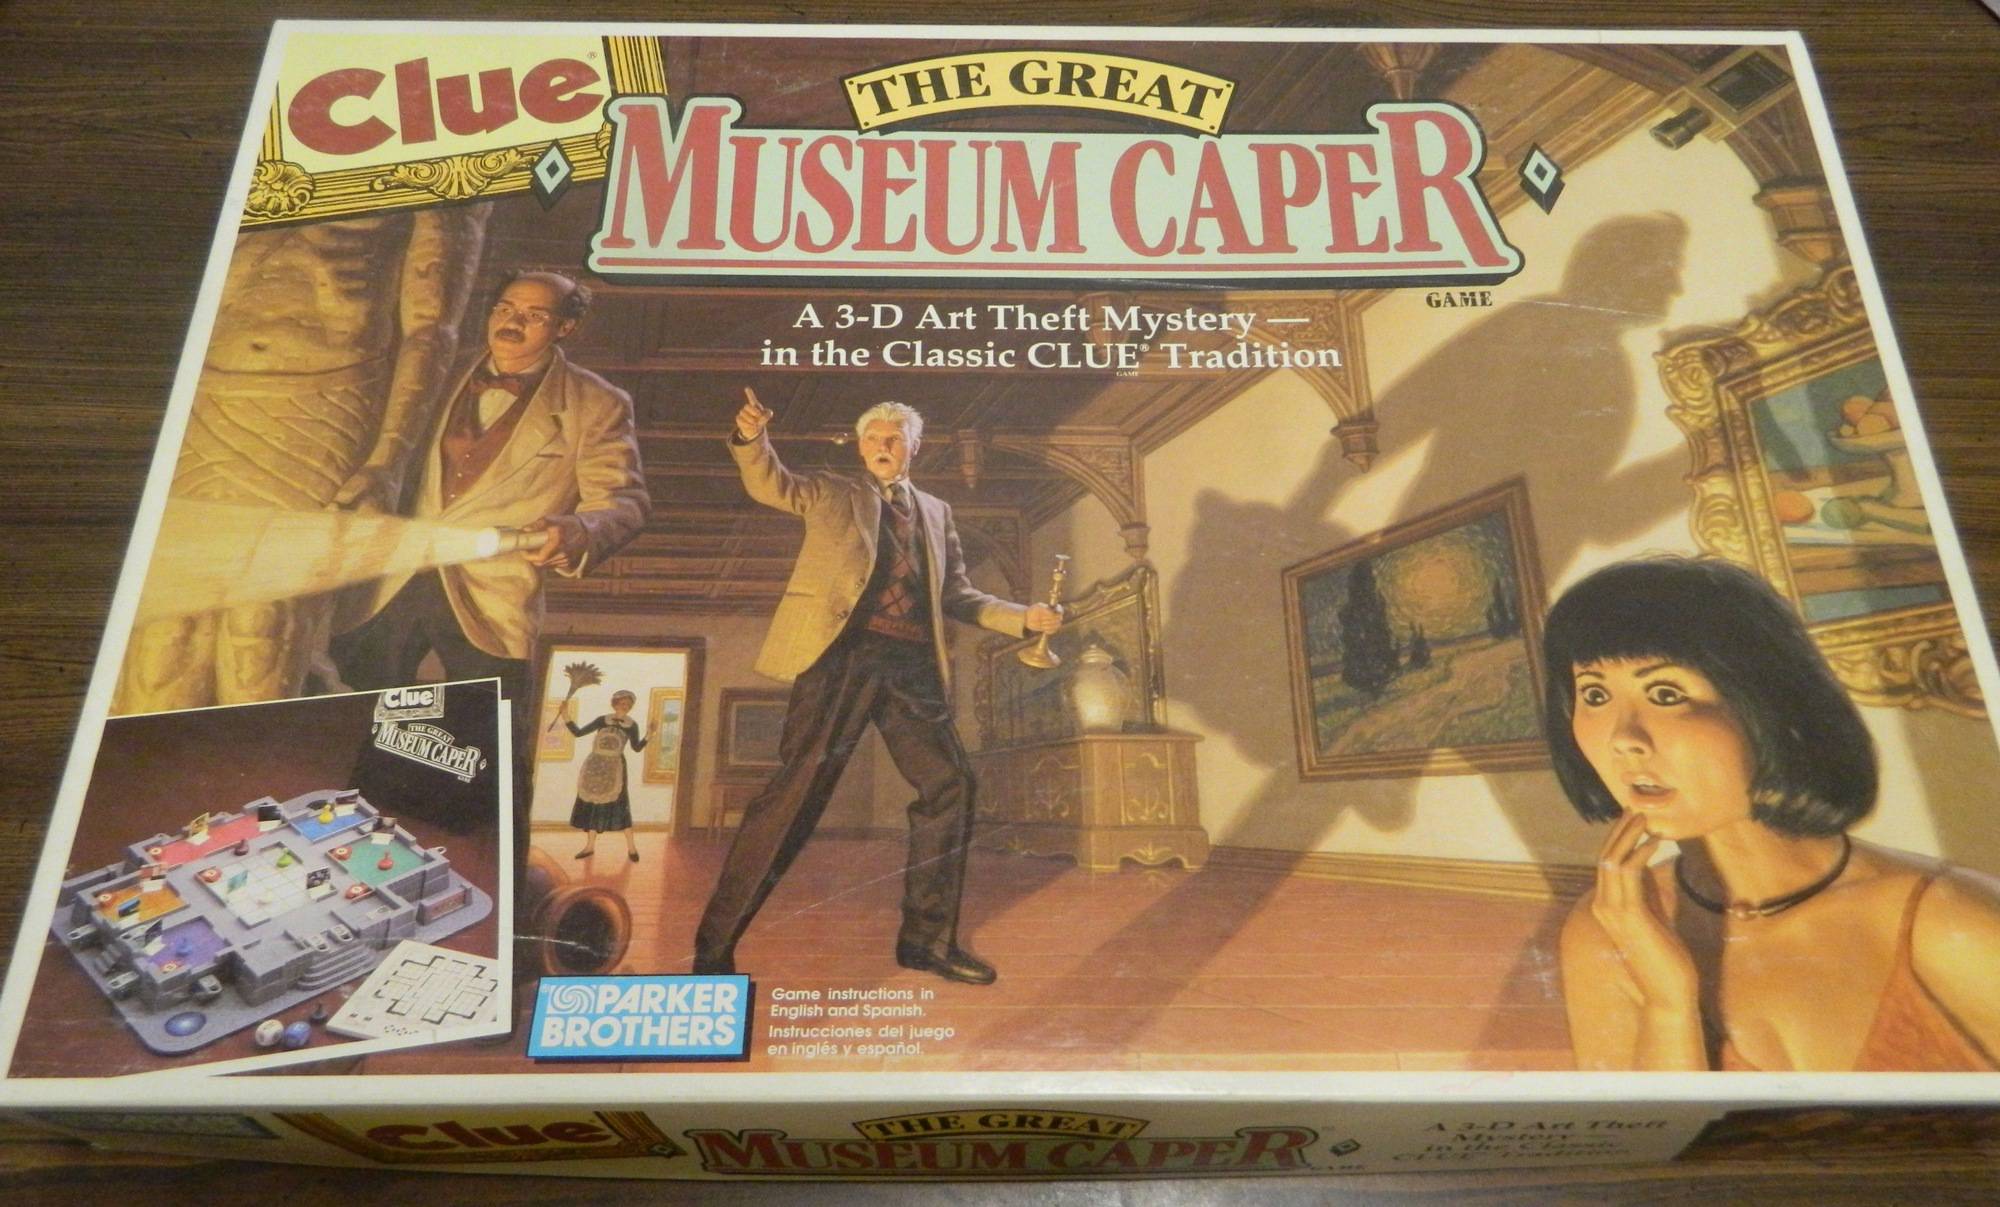 Clue The Great Museum Caper Board Game Review and Rules